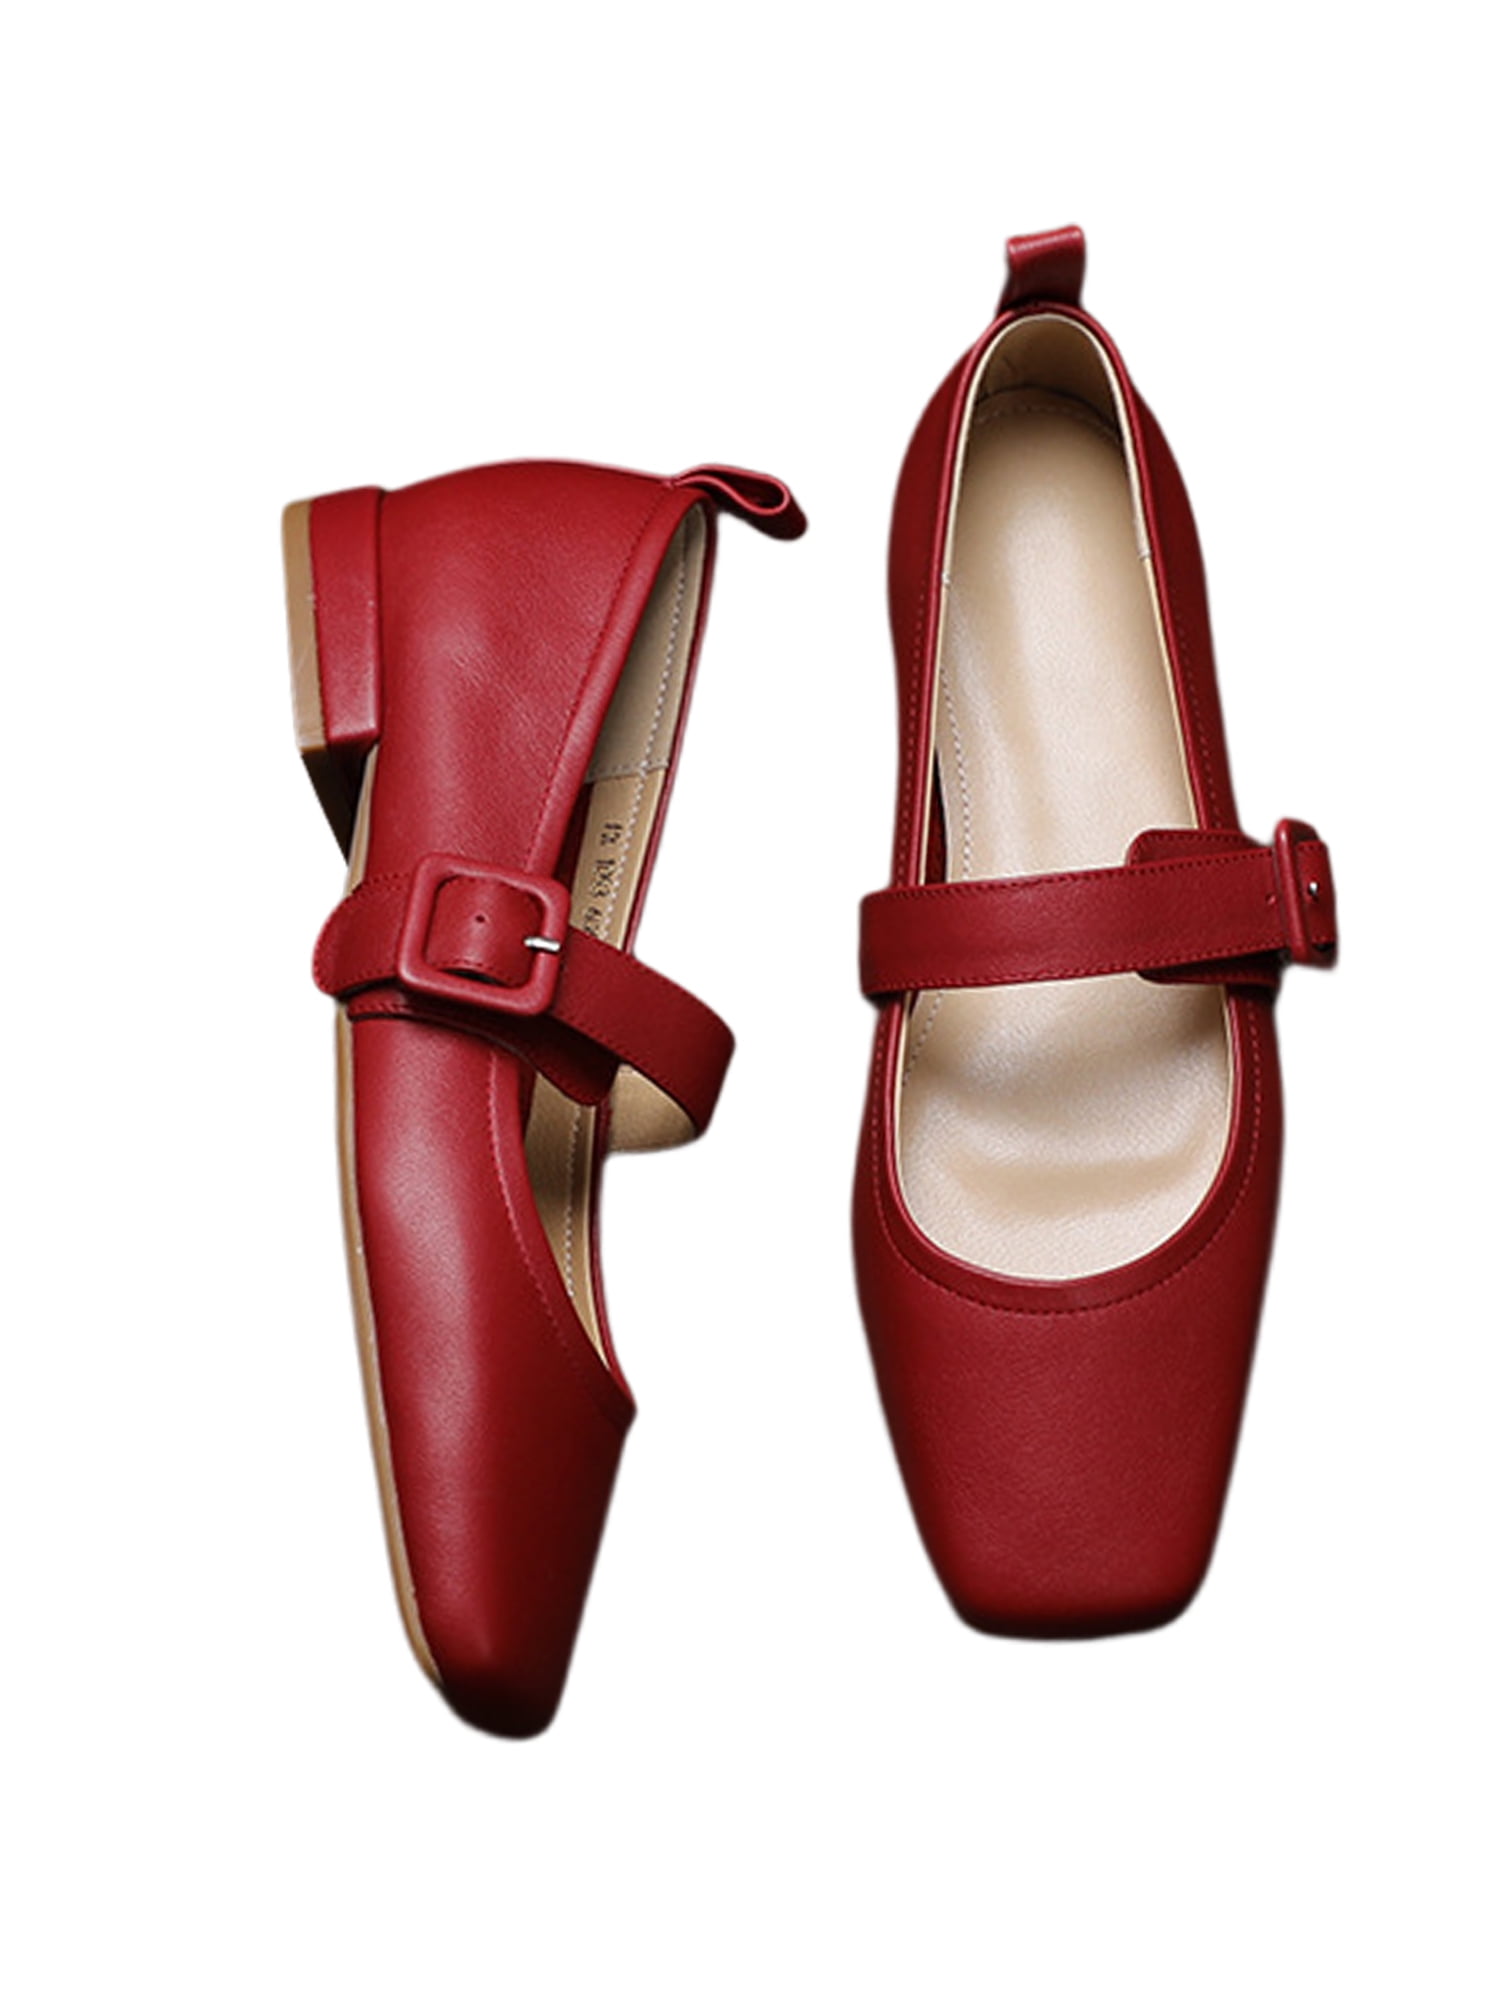 The Best Ballet Flats | The Strategist